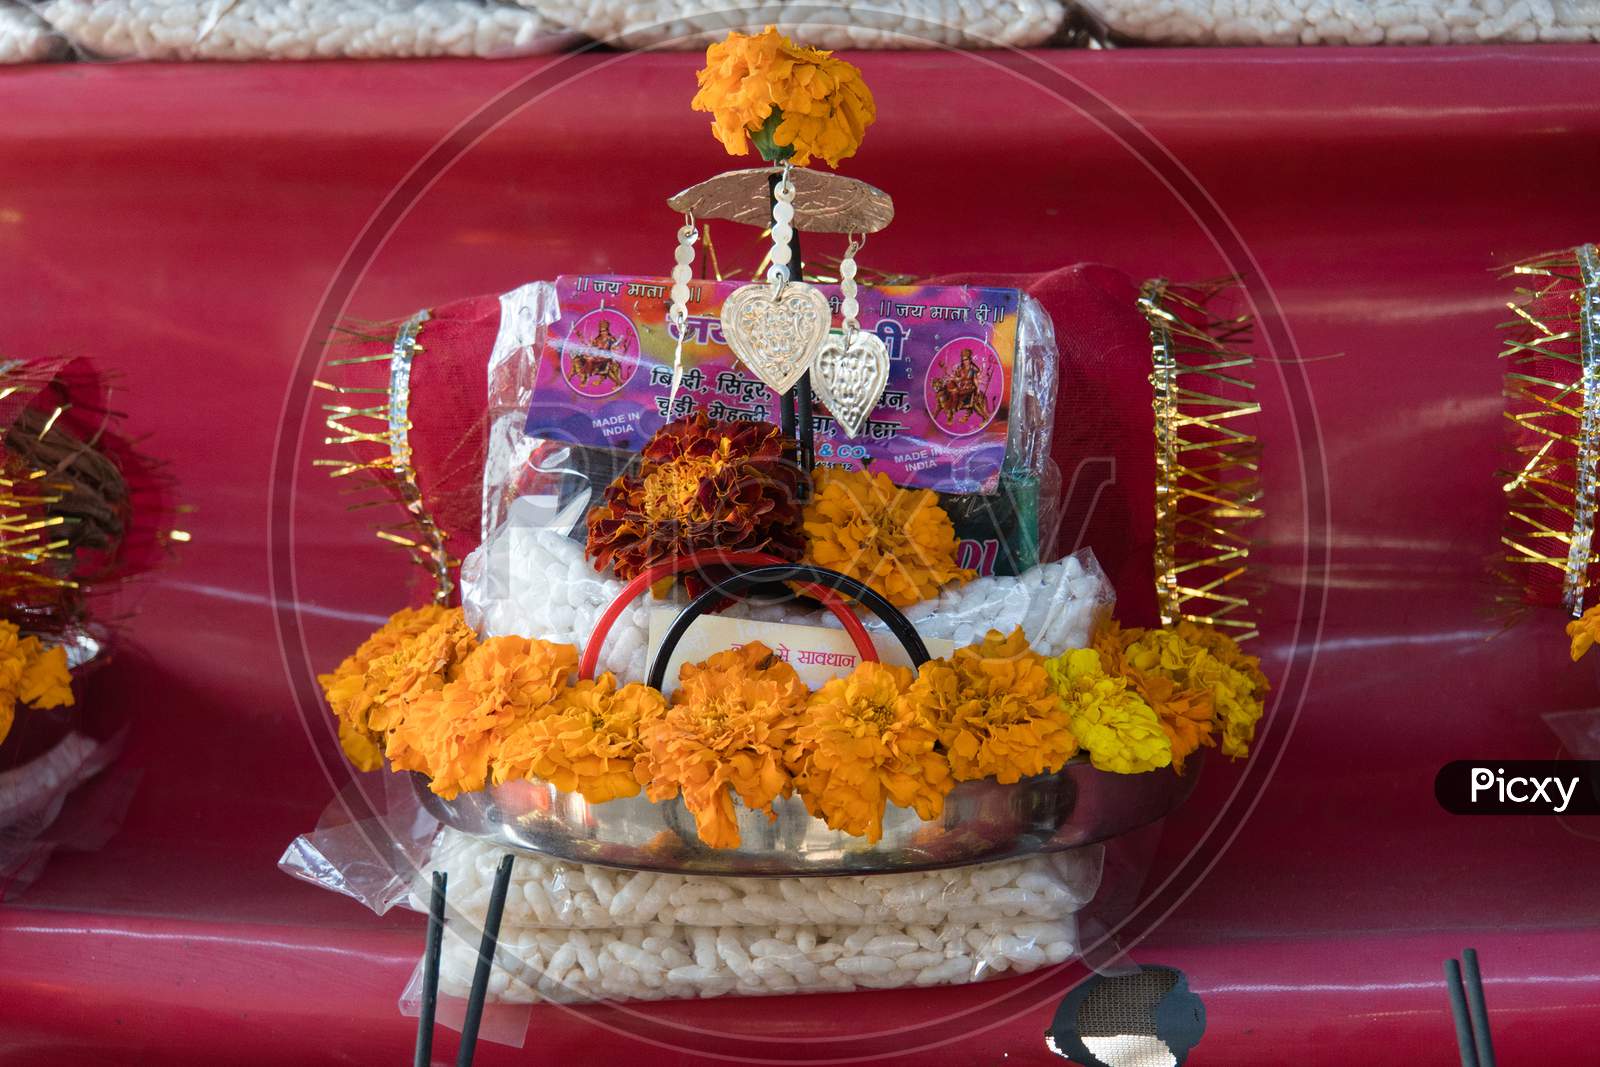 Garland From Orange And White Flowers In The Basket At Street Market Near Temple In Haridwar, India 8 January 2018.